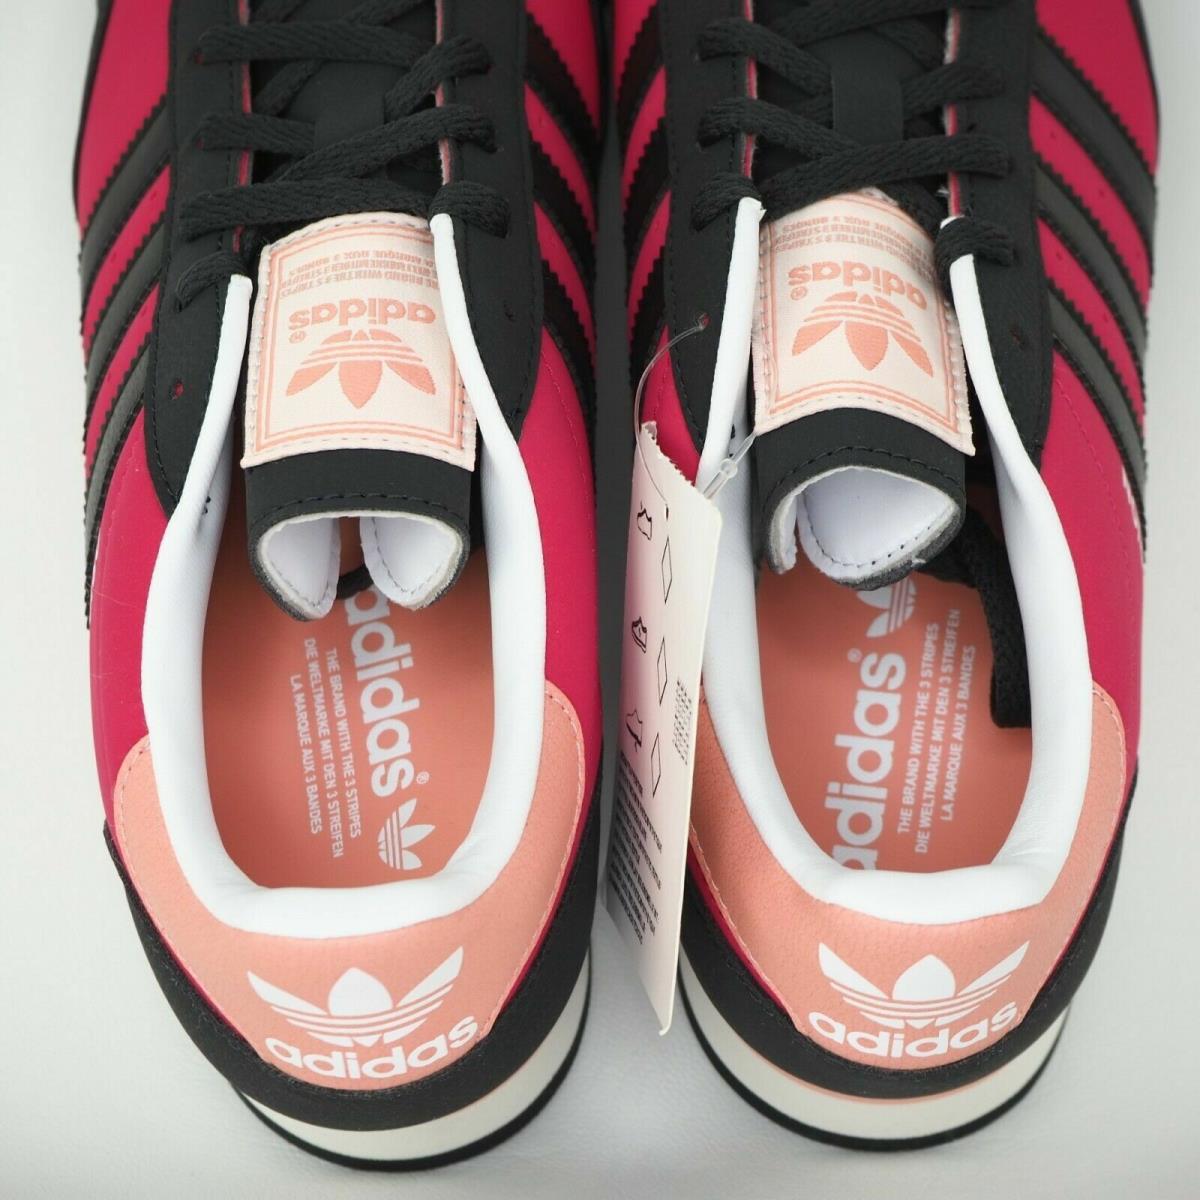 Adidas shoes Orion - Pink 4